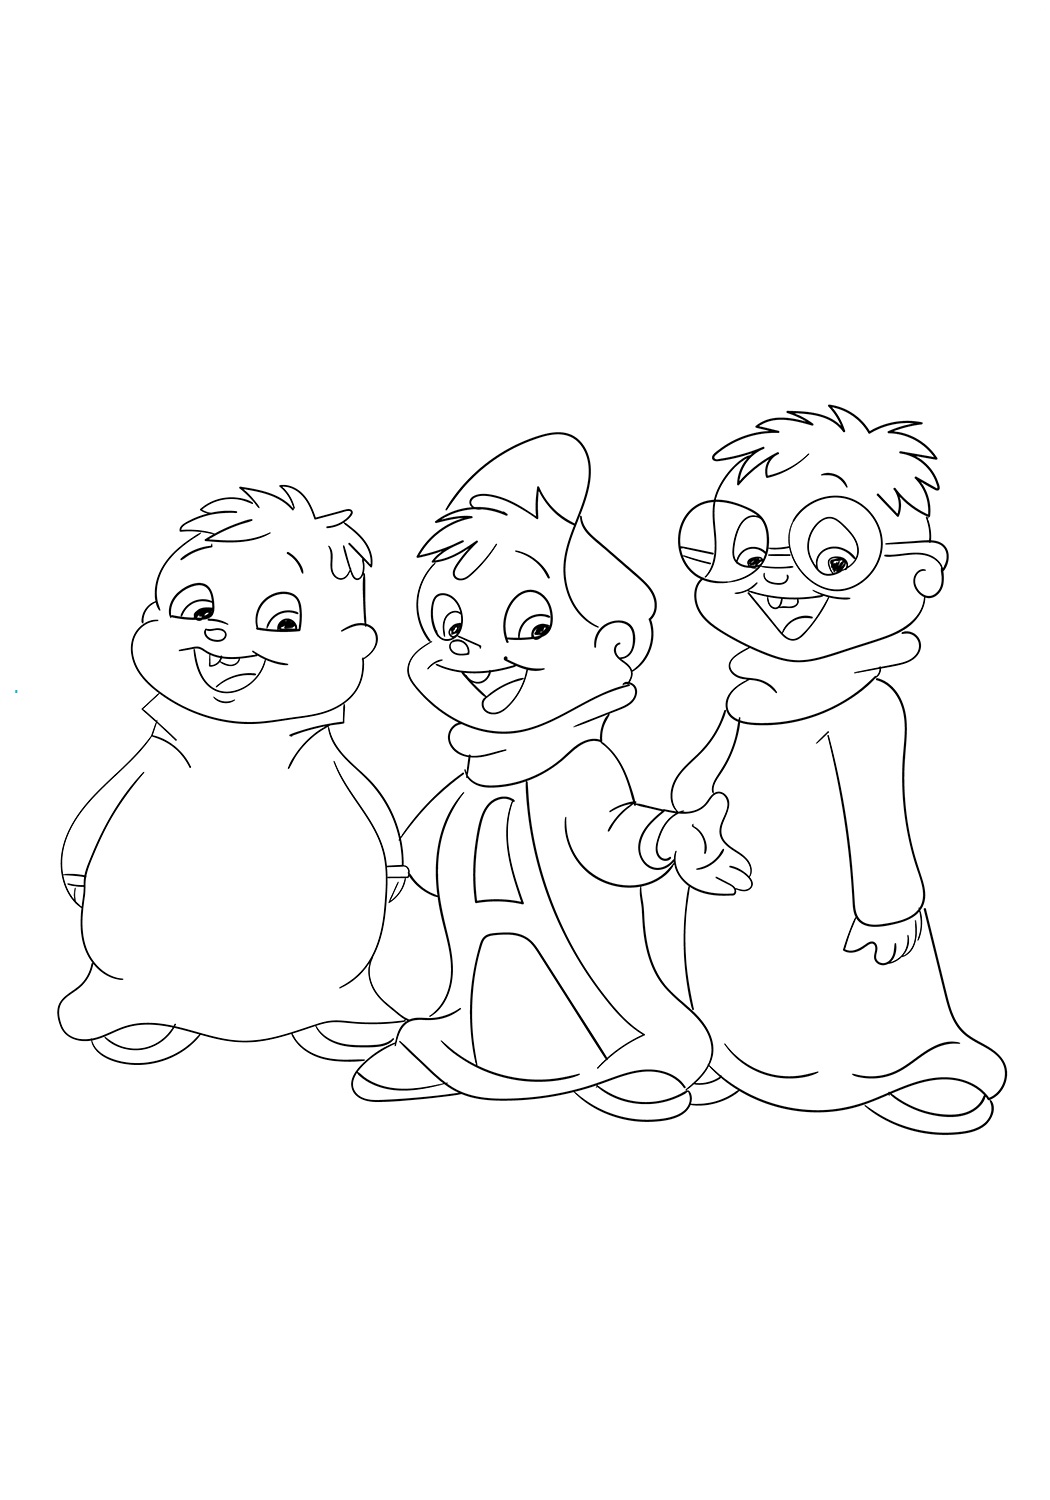 Cute The Chipmunks Coloring Page